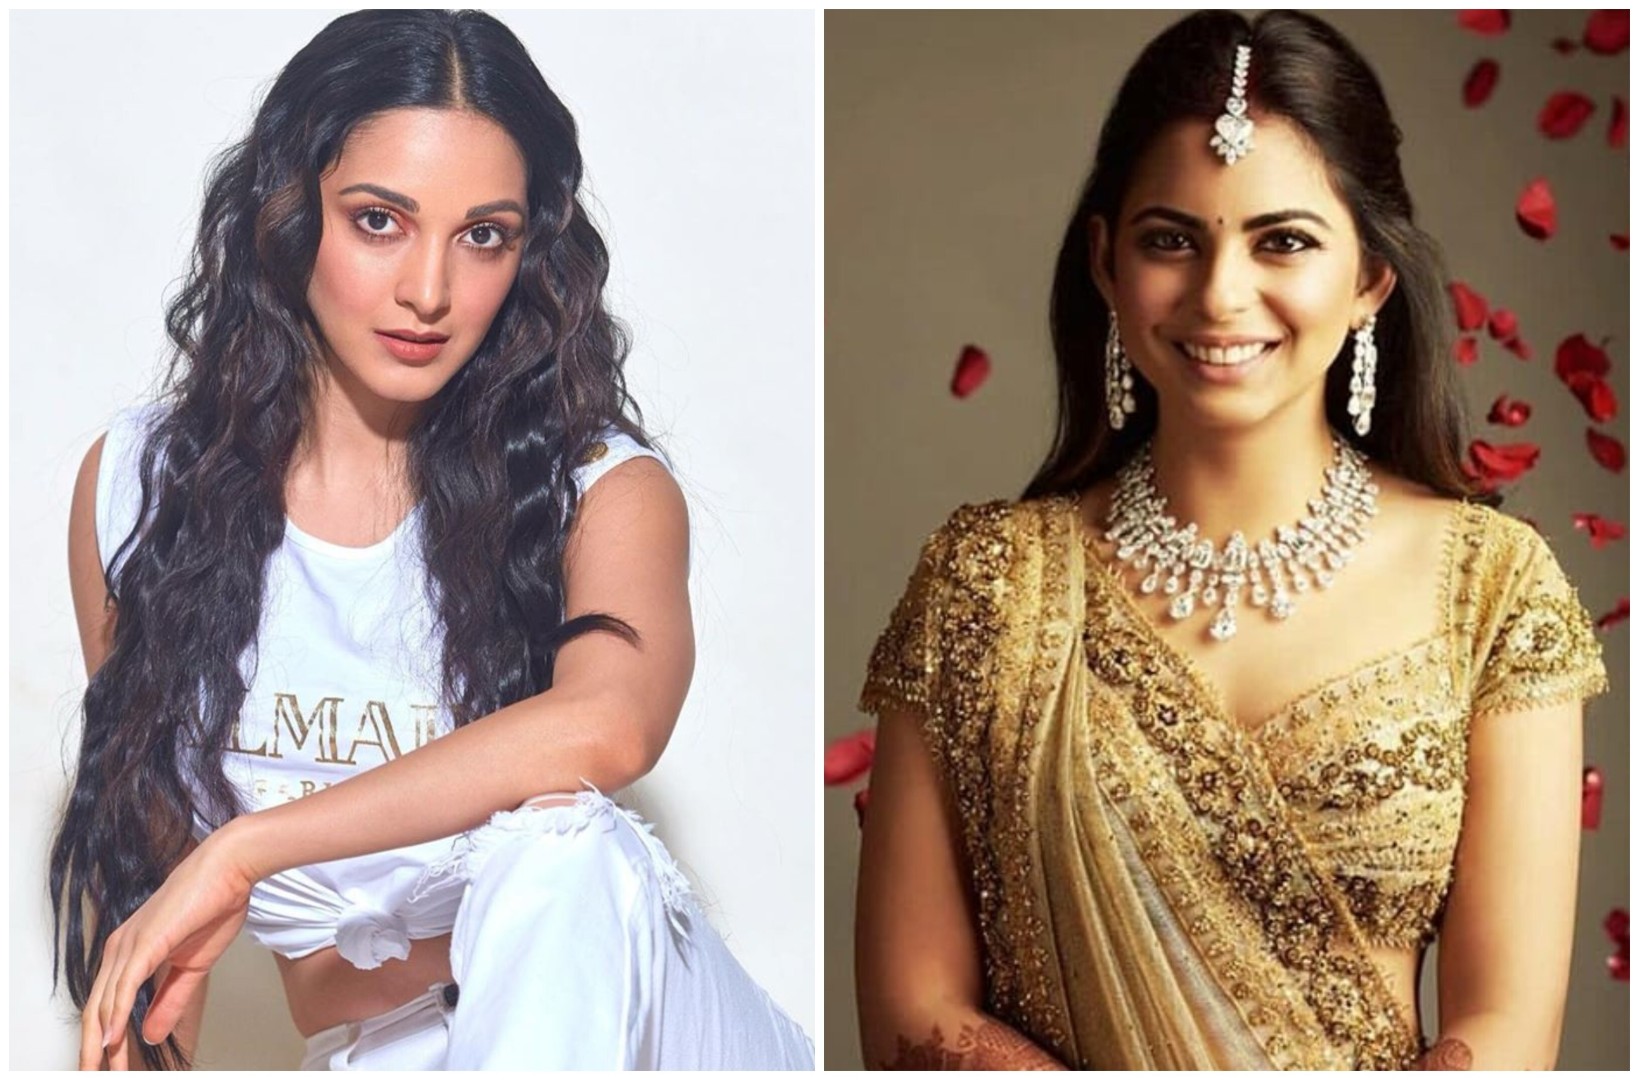 Why Isha Ambani and Kiara Advani are BFFs â€“ and how the Bollywood actress  and heiress daughter of billionaire Mukesh weathered ups and downs over the  years | South China Morning Post